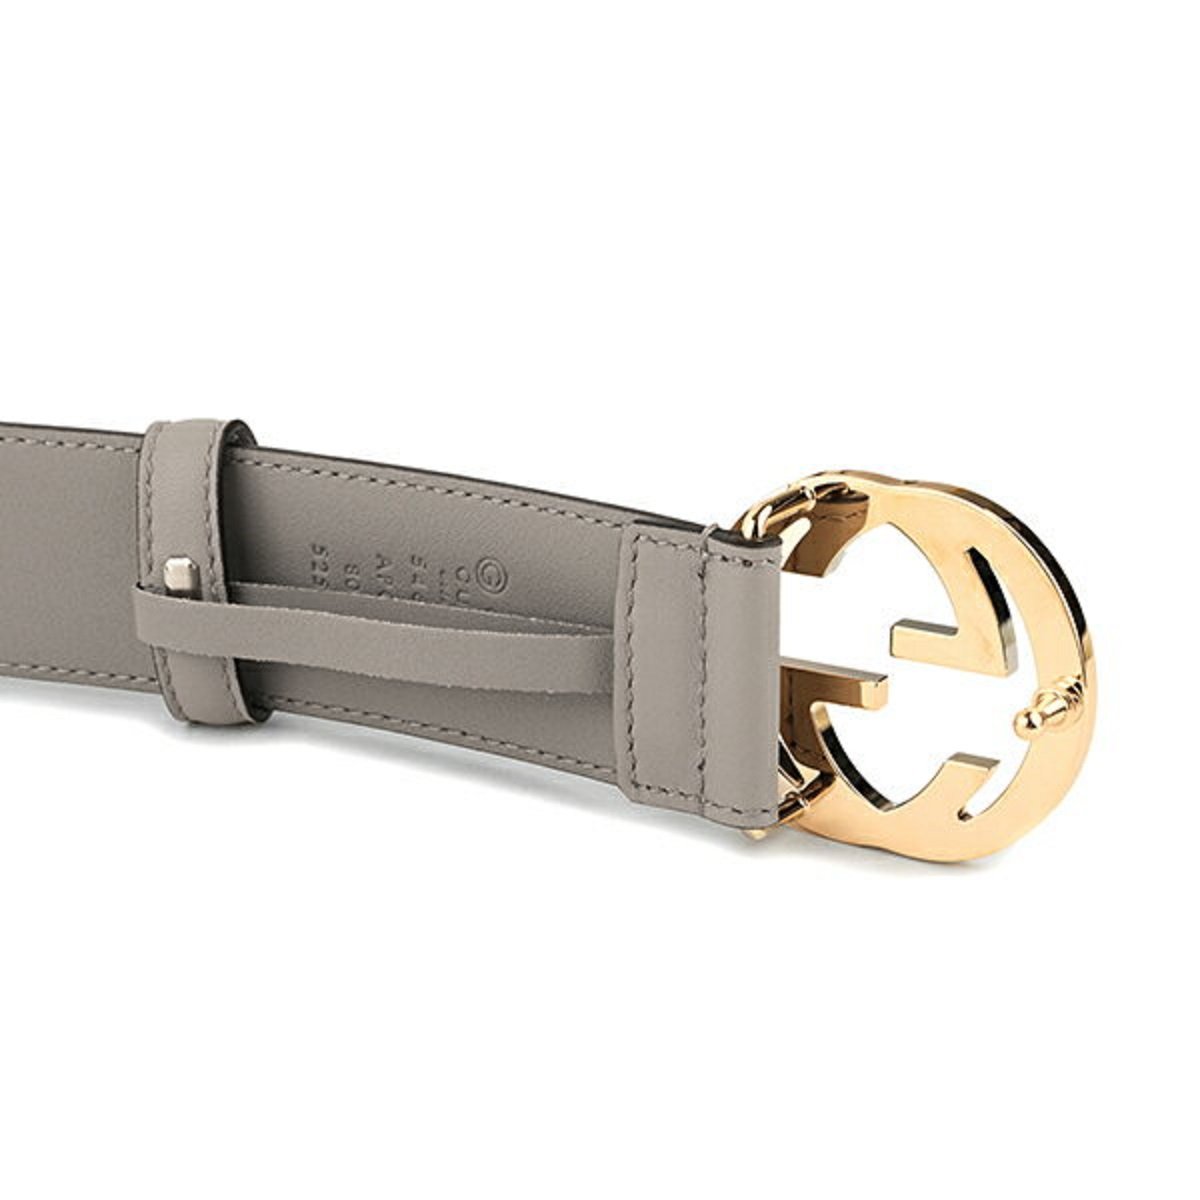 Gucci Storm Grey Leather Interlocking GG Buckle 80/32 Belt 546386 at_Queen_Bee_of_Beverly_Hills